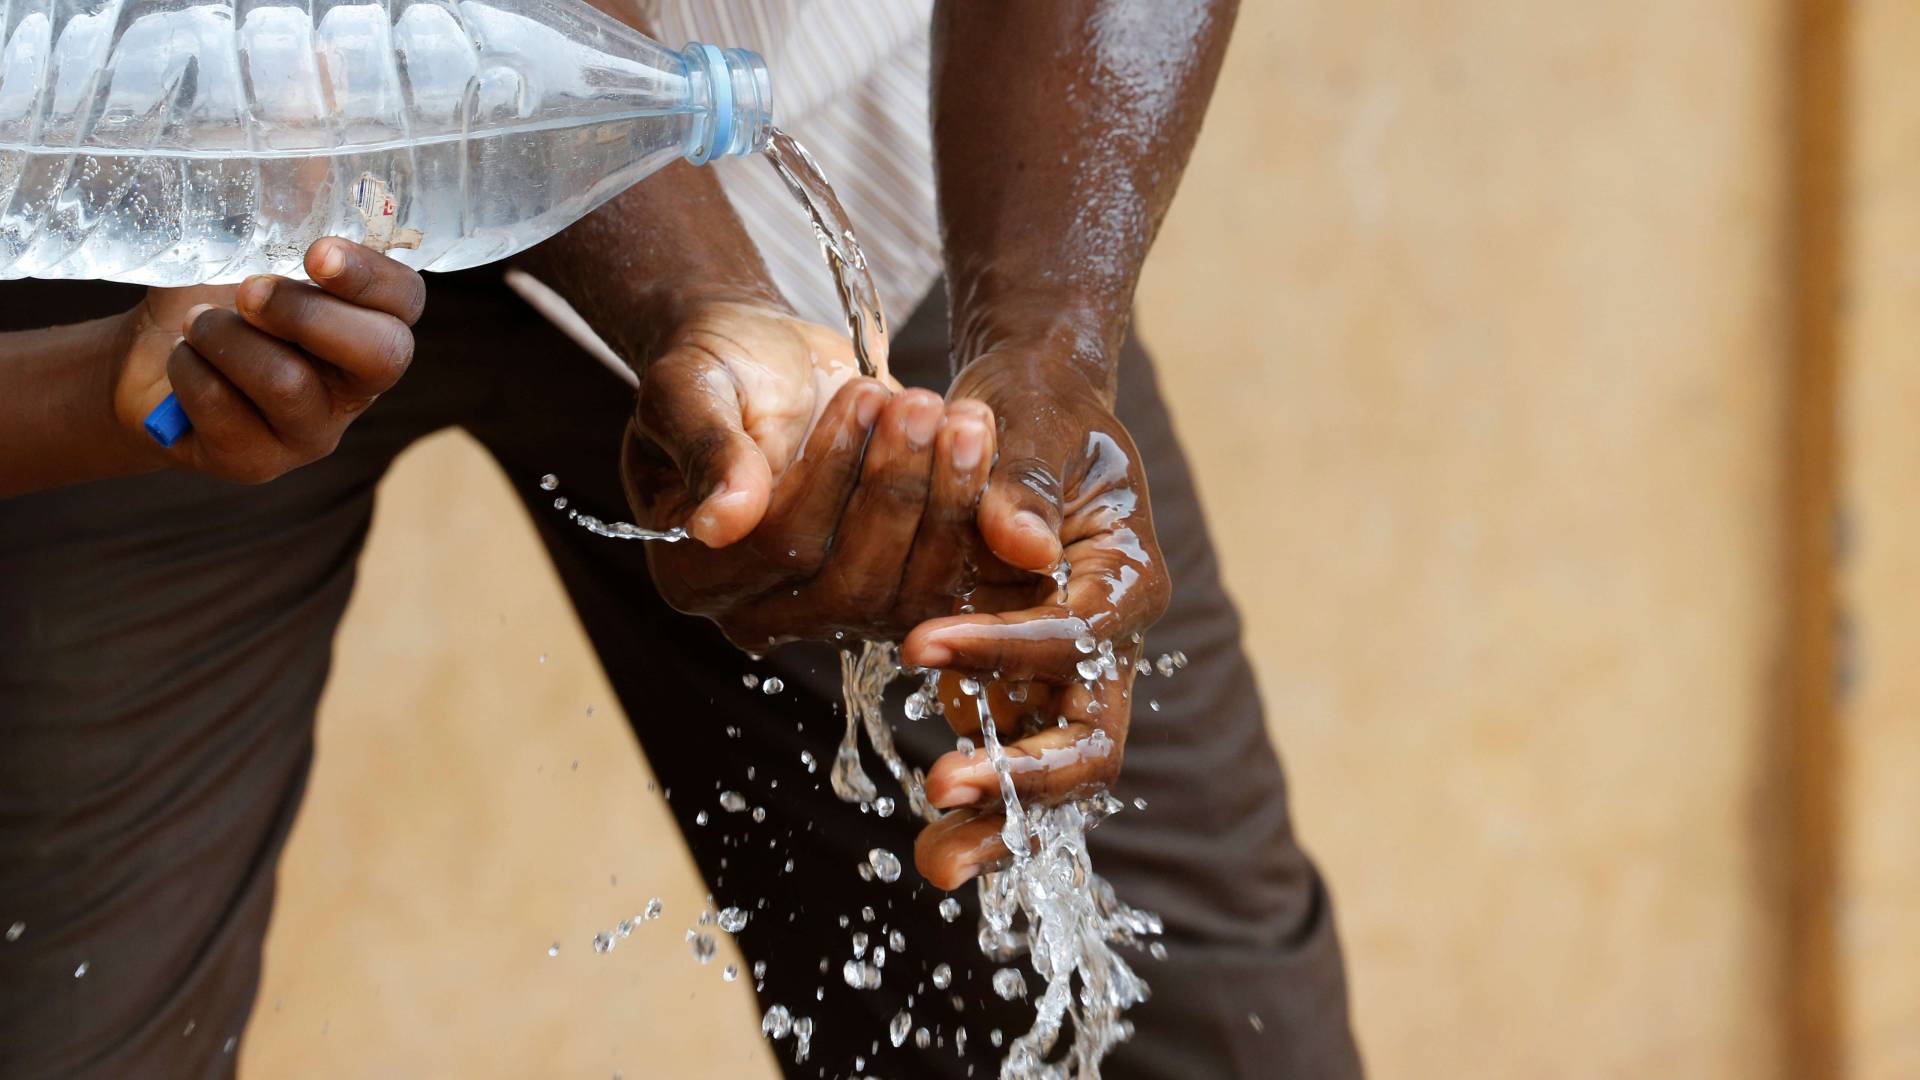 Water being poured out of a bottle to wash hands, symbolizing scarcity of drinking water